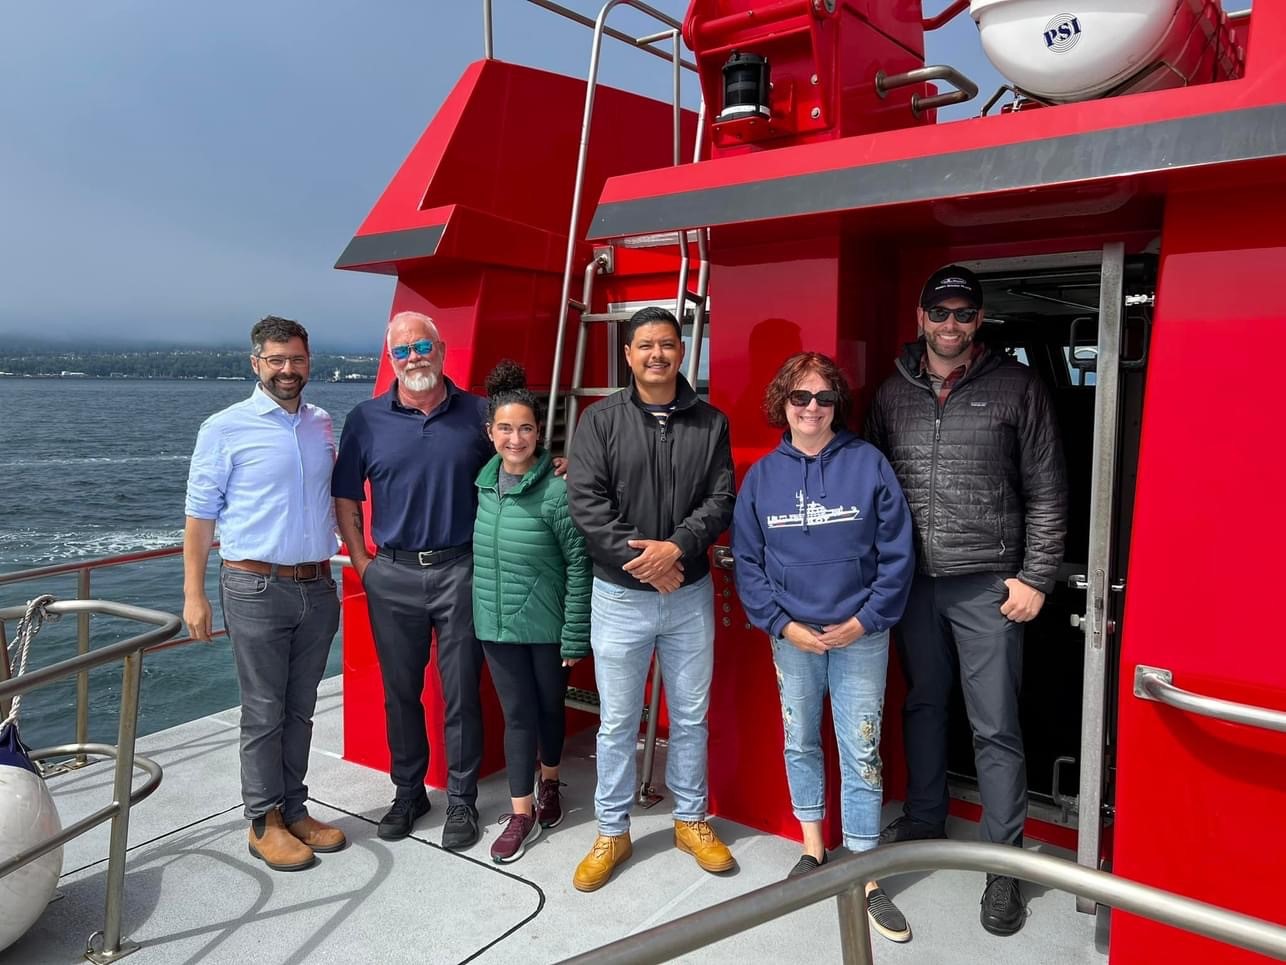 Rep. Cortes aboard a vessel with Puget Sound Pilots